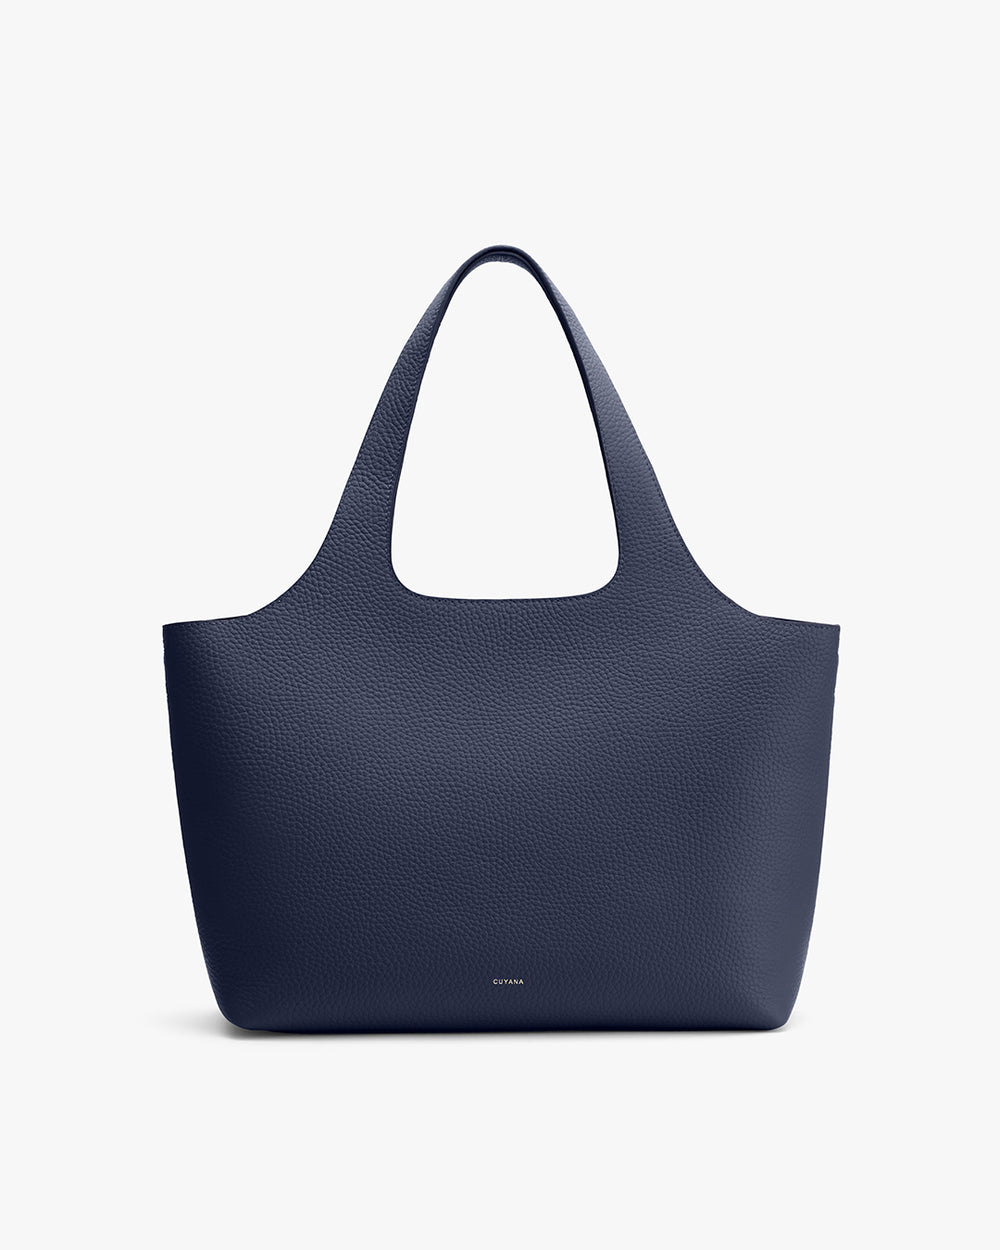 Large tote bag centered on a plain background.